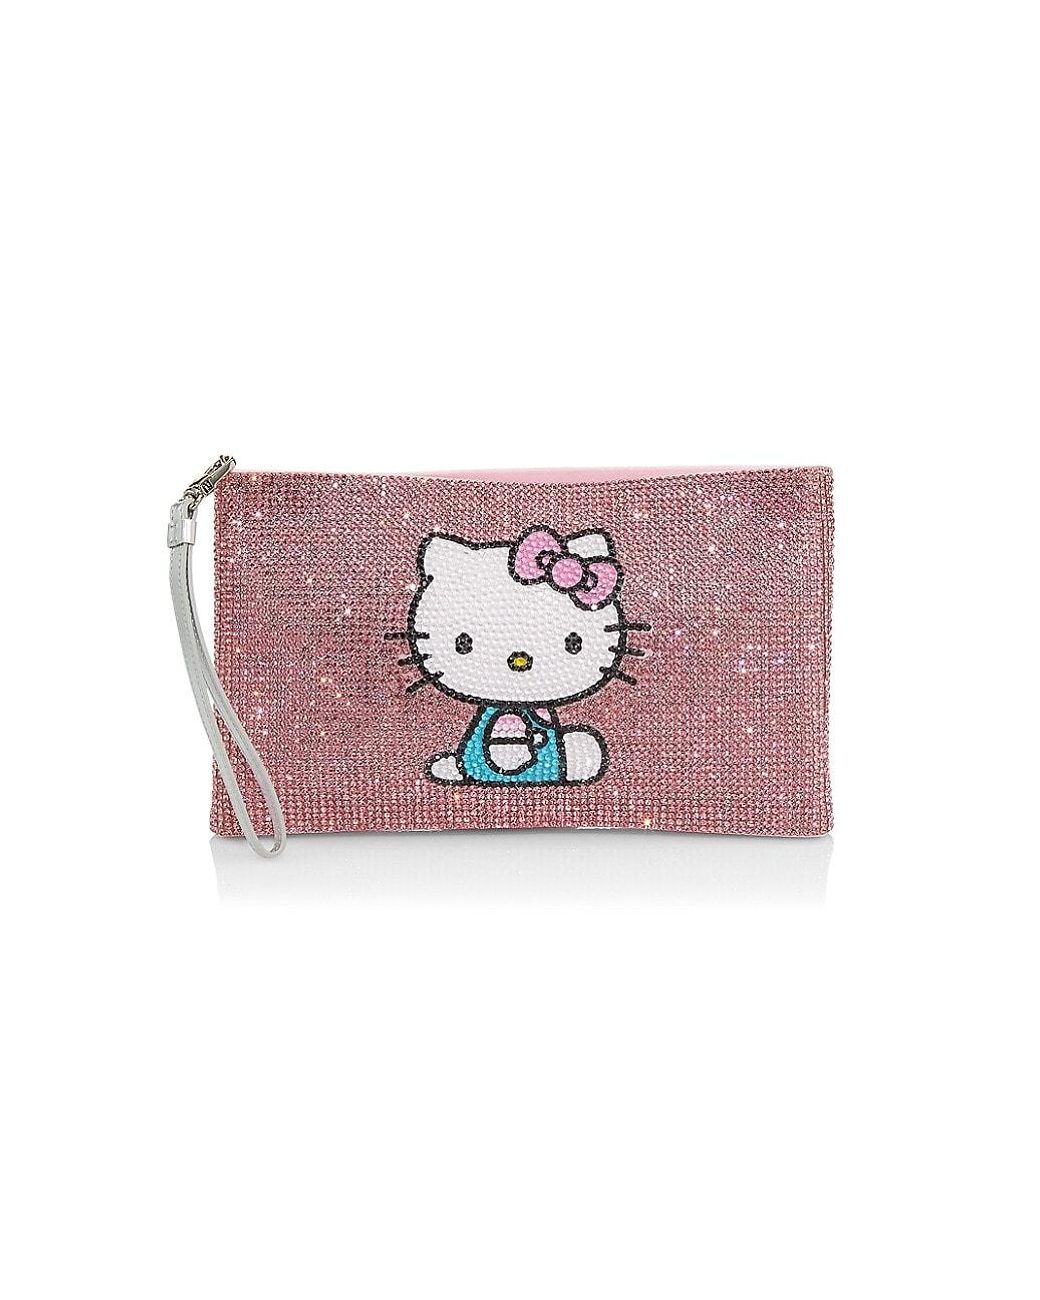 Judith Leiber x Hello Kitty Candy Bar Crystal Clutch in Silver Light Rose Multi